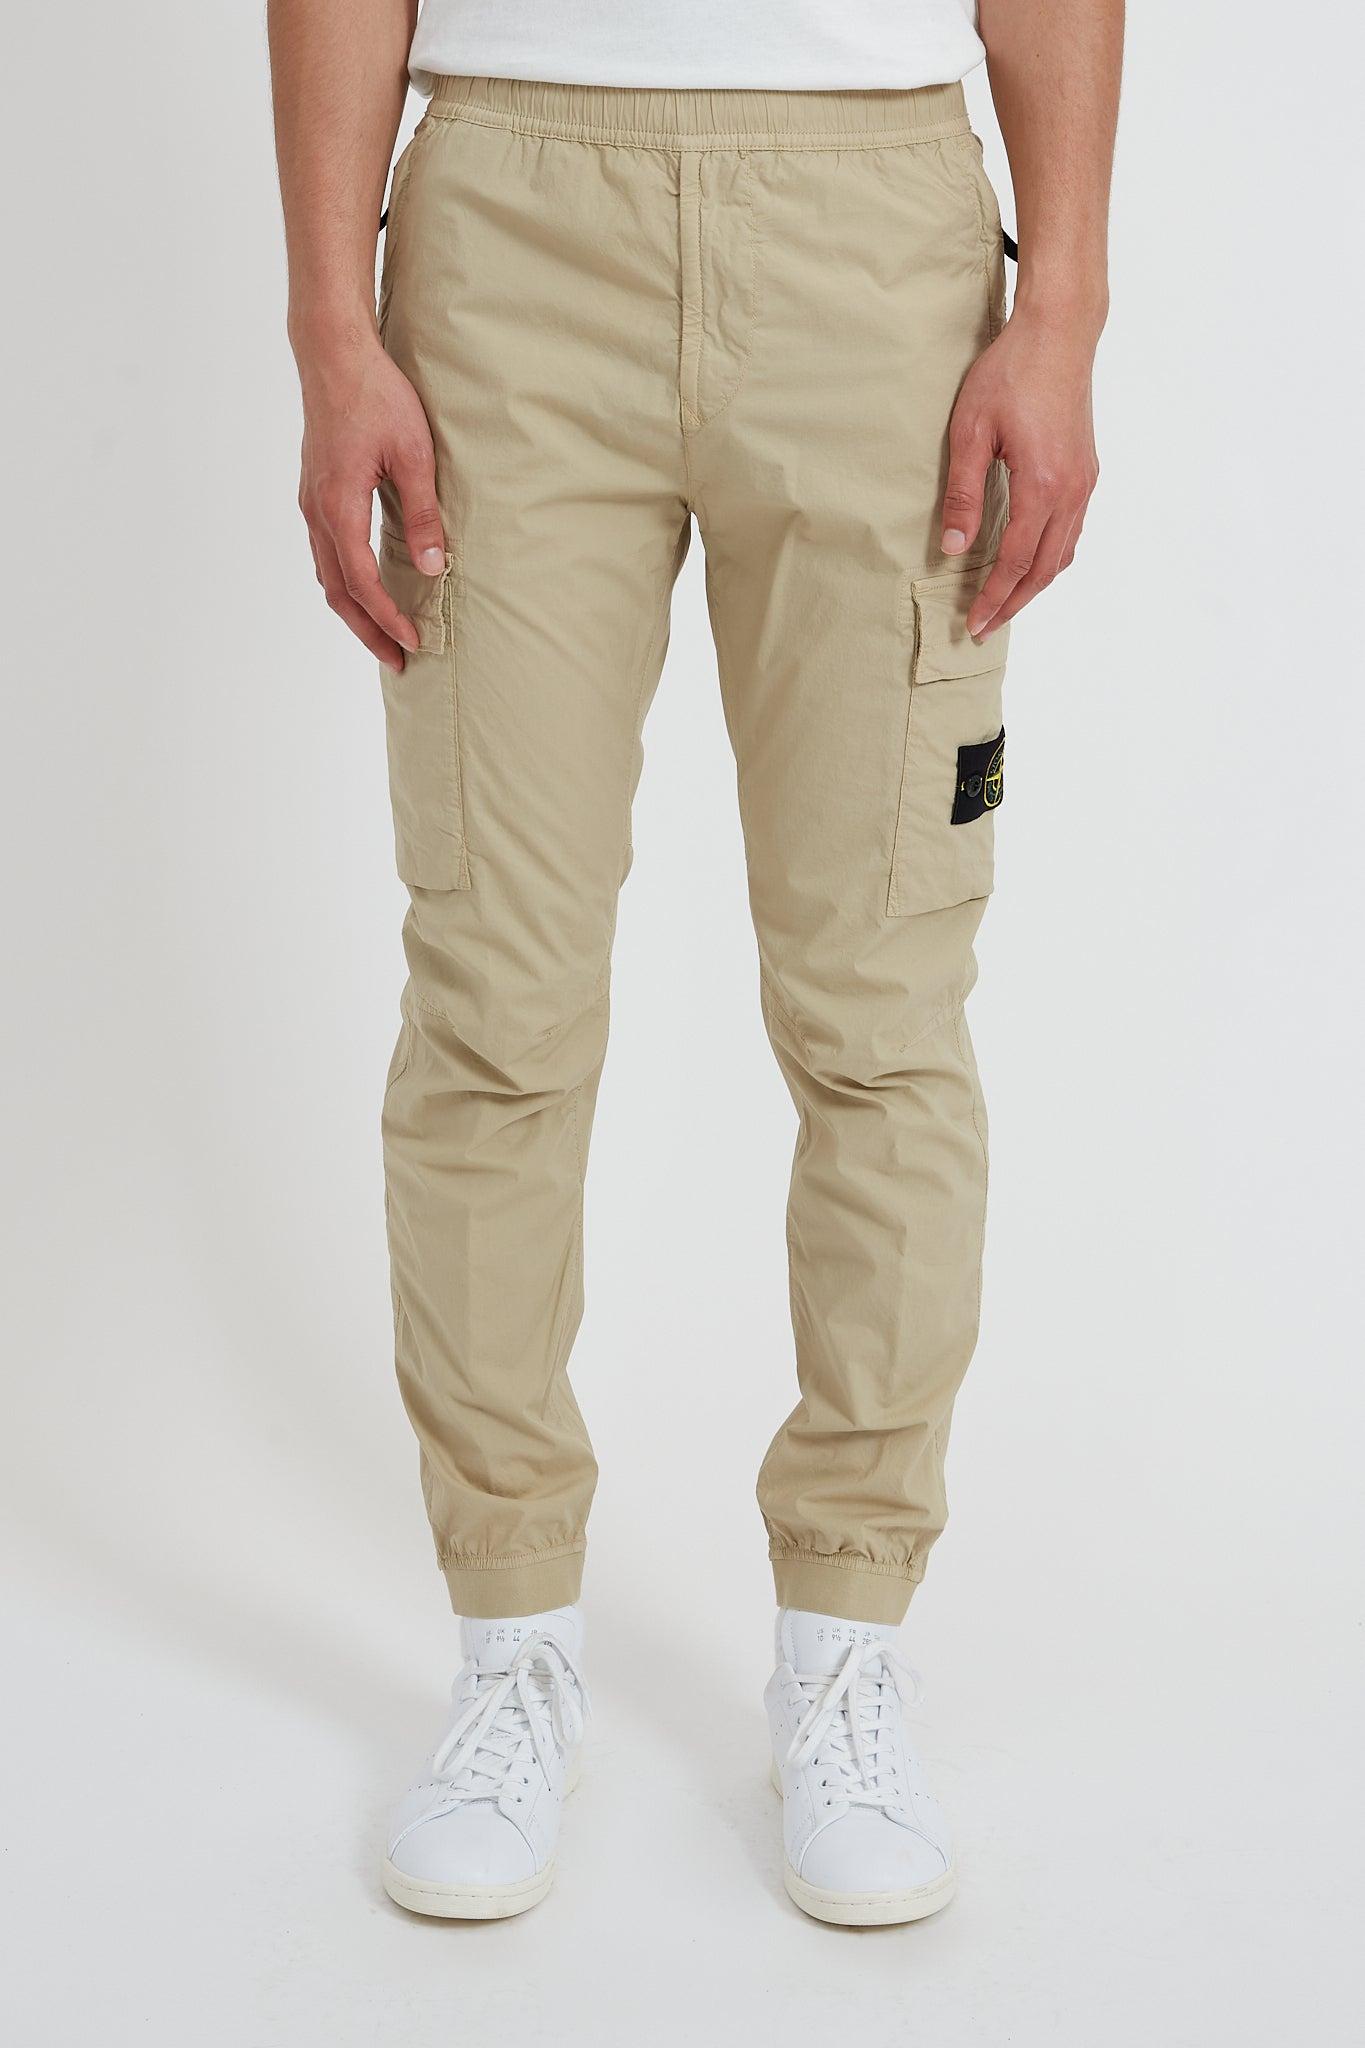 Stone Island 31303 Stretch Cotton Tela Paracadute Cargo Pants in Beige  (Natural) for Men | Lyst